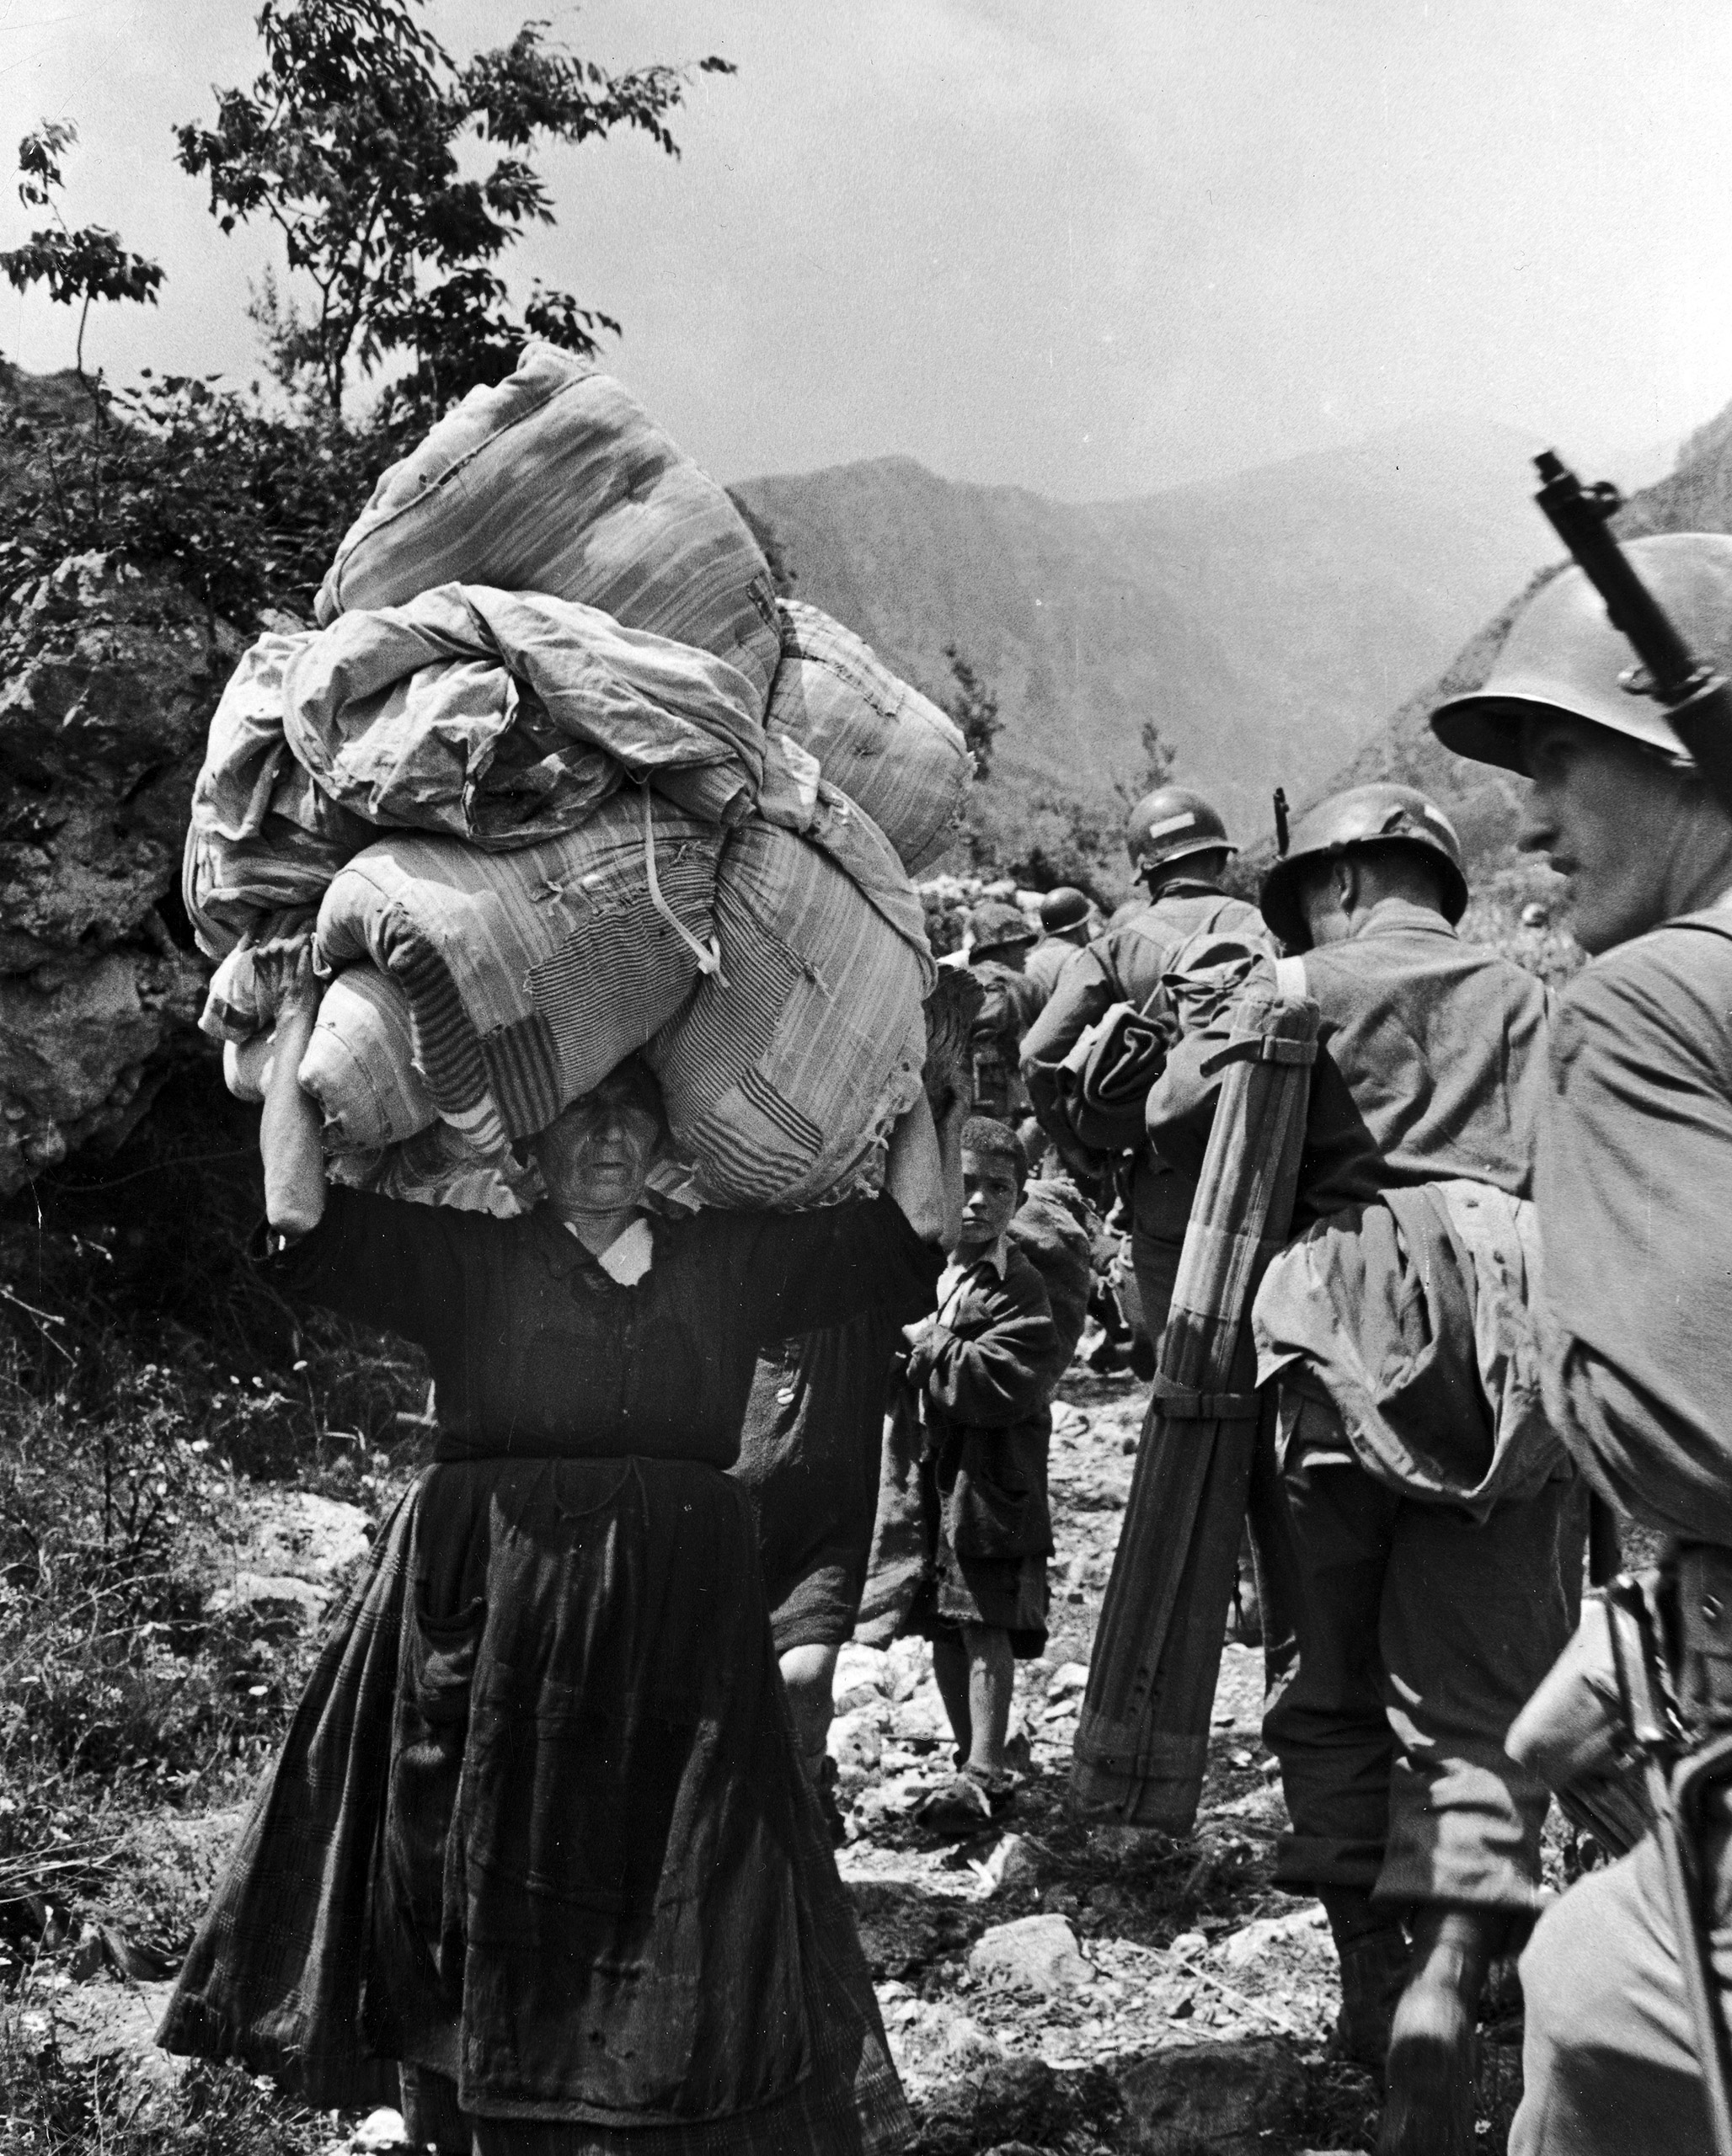 American soldiers passing refugees fleeing the fighting somewhere in the mountains of Italy during WWII. 1944.